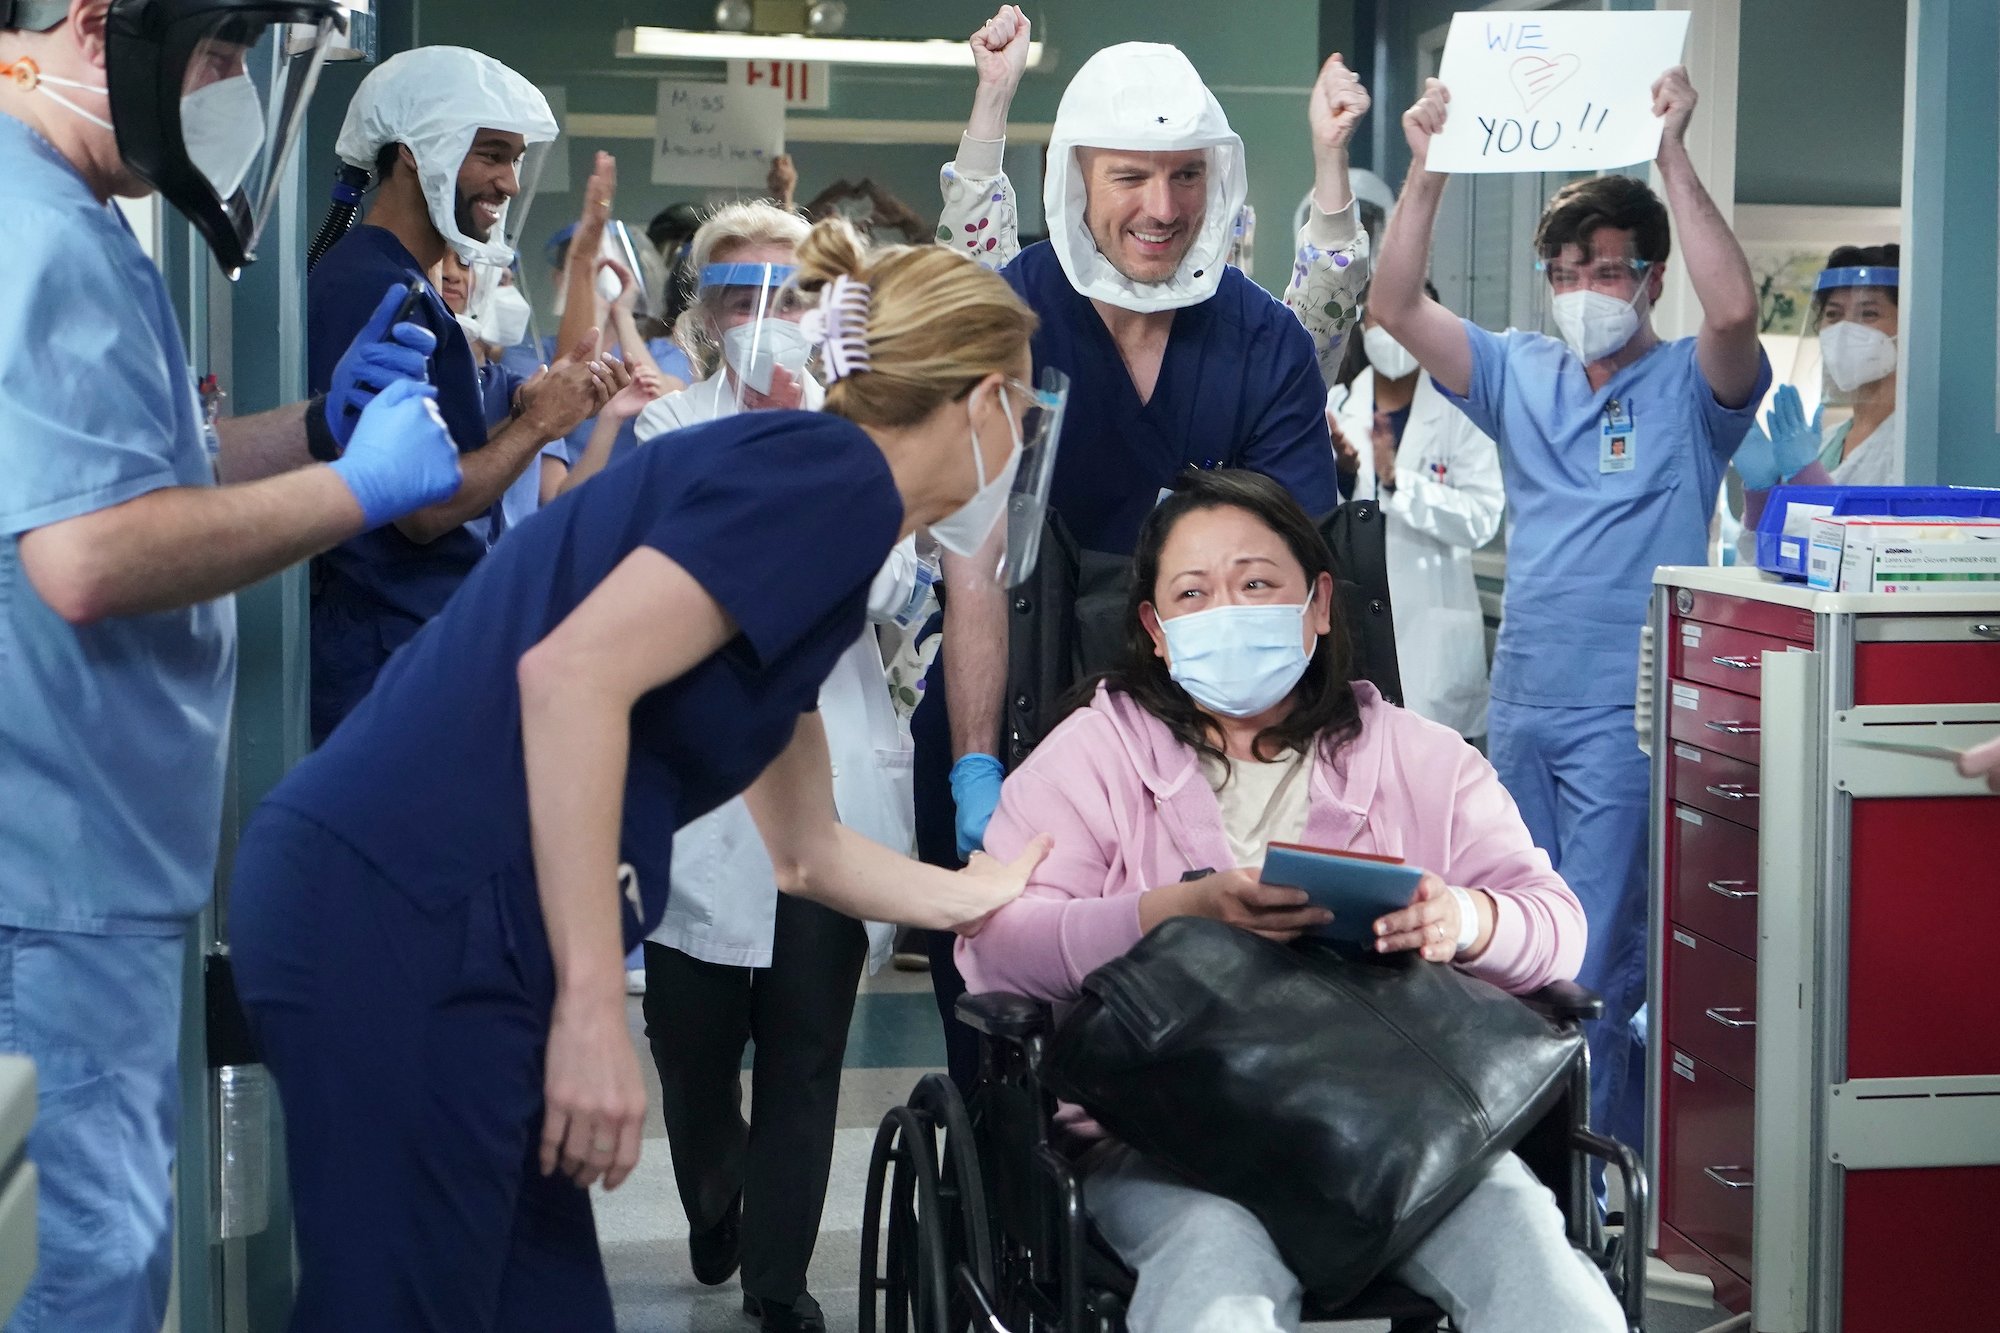 Grey's Anatomy cast wheeling out a patient and cheering